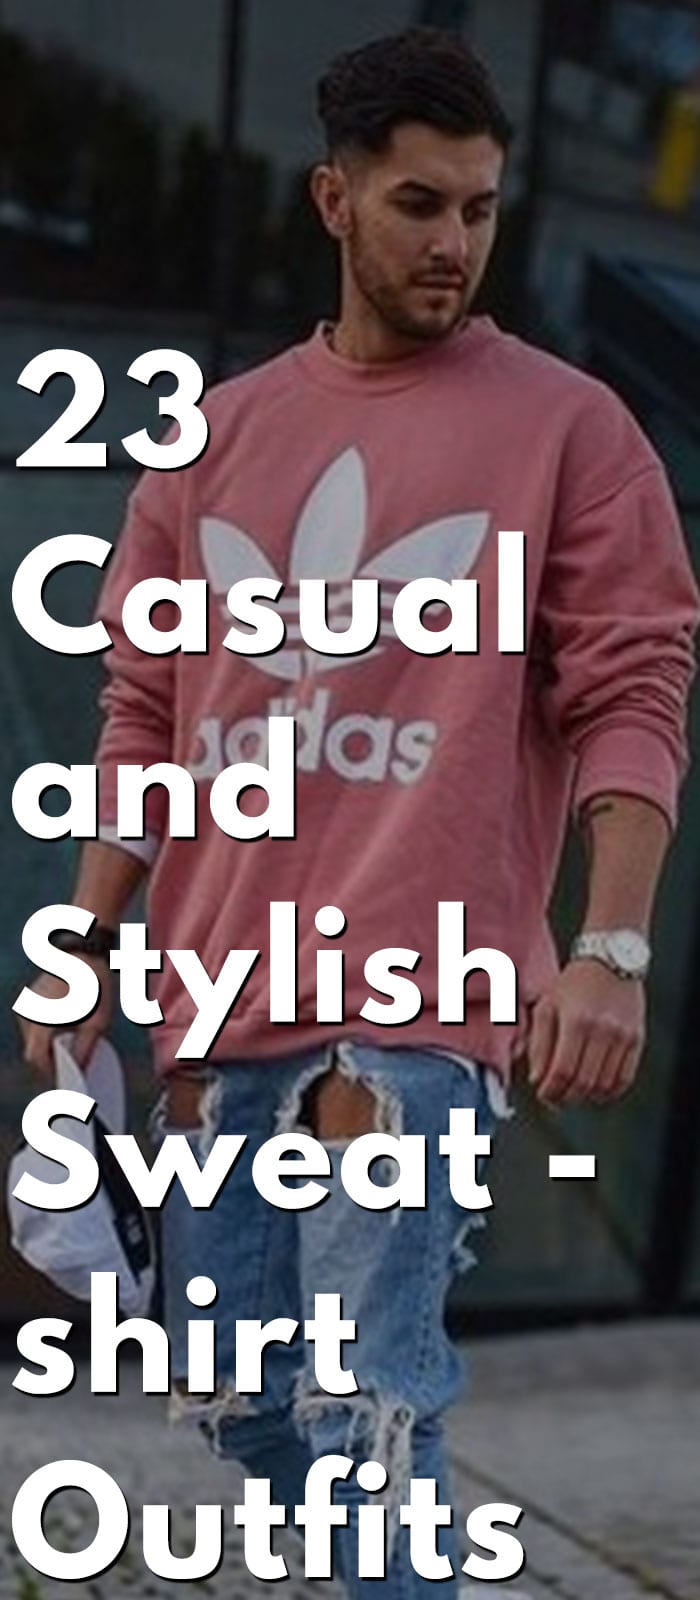 23-Casual-and-Stylish-Sweatshirt-Outfits